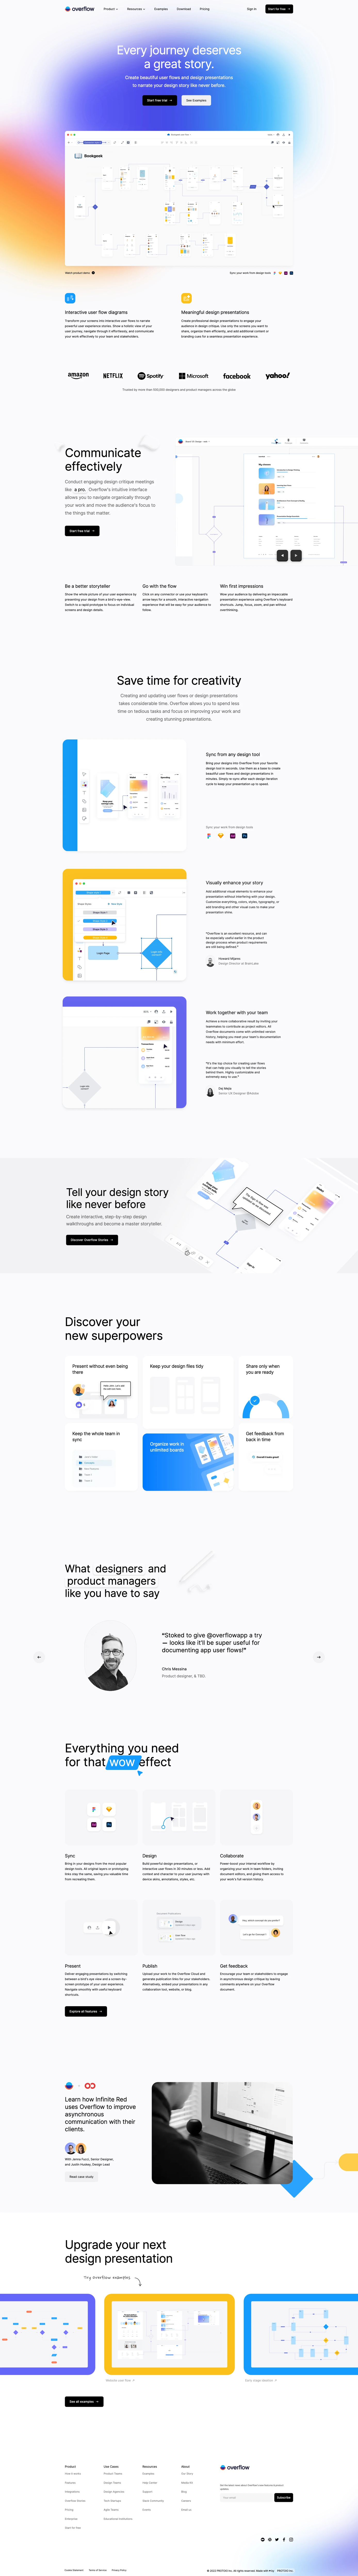 Overflow Landing Page Example: The first user flow diagramming software for design and product teams. Present your design ideas with interactive user flow diagrams and flowcharts.